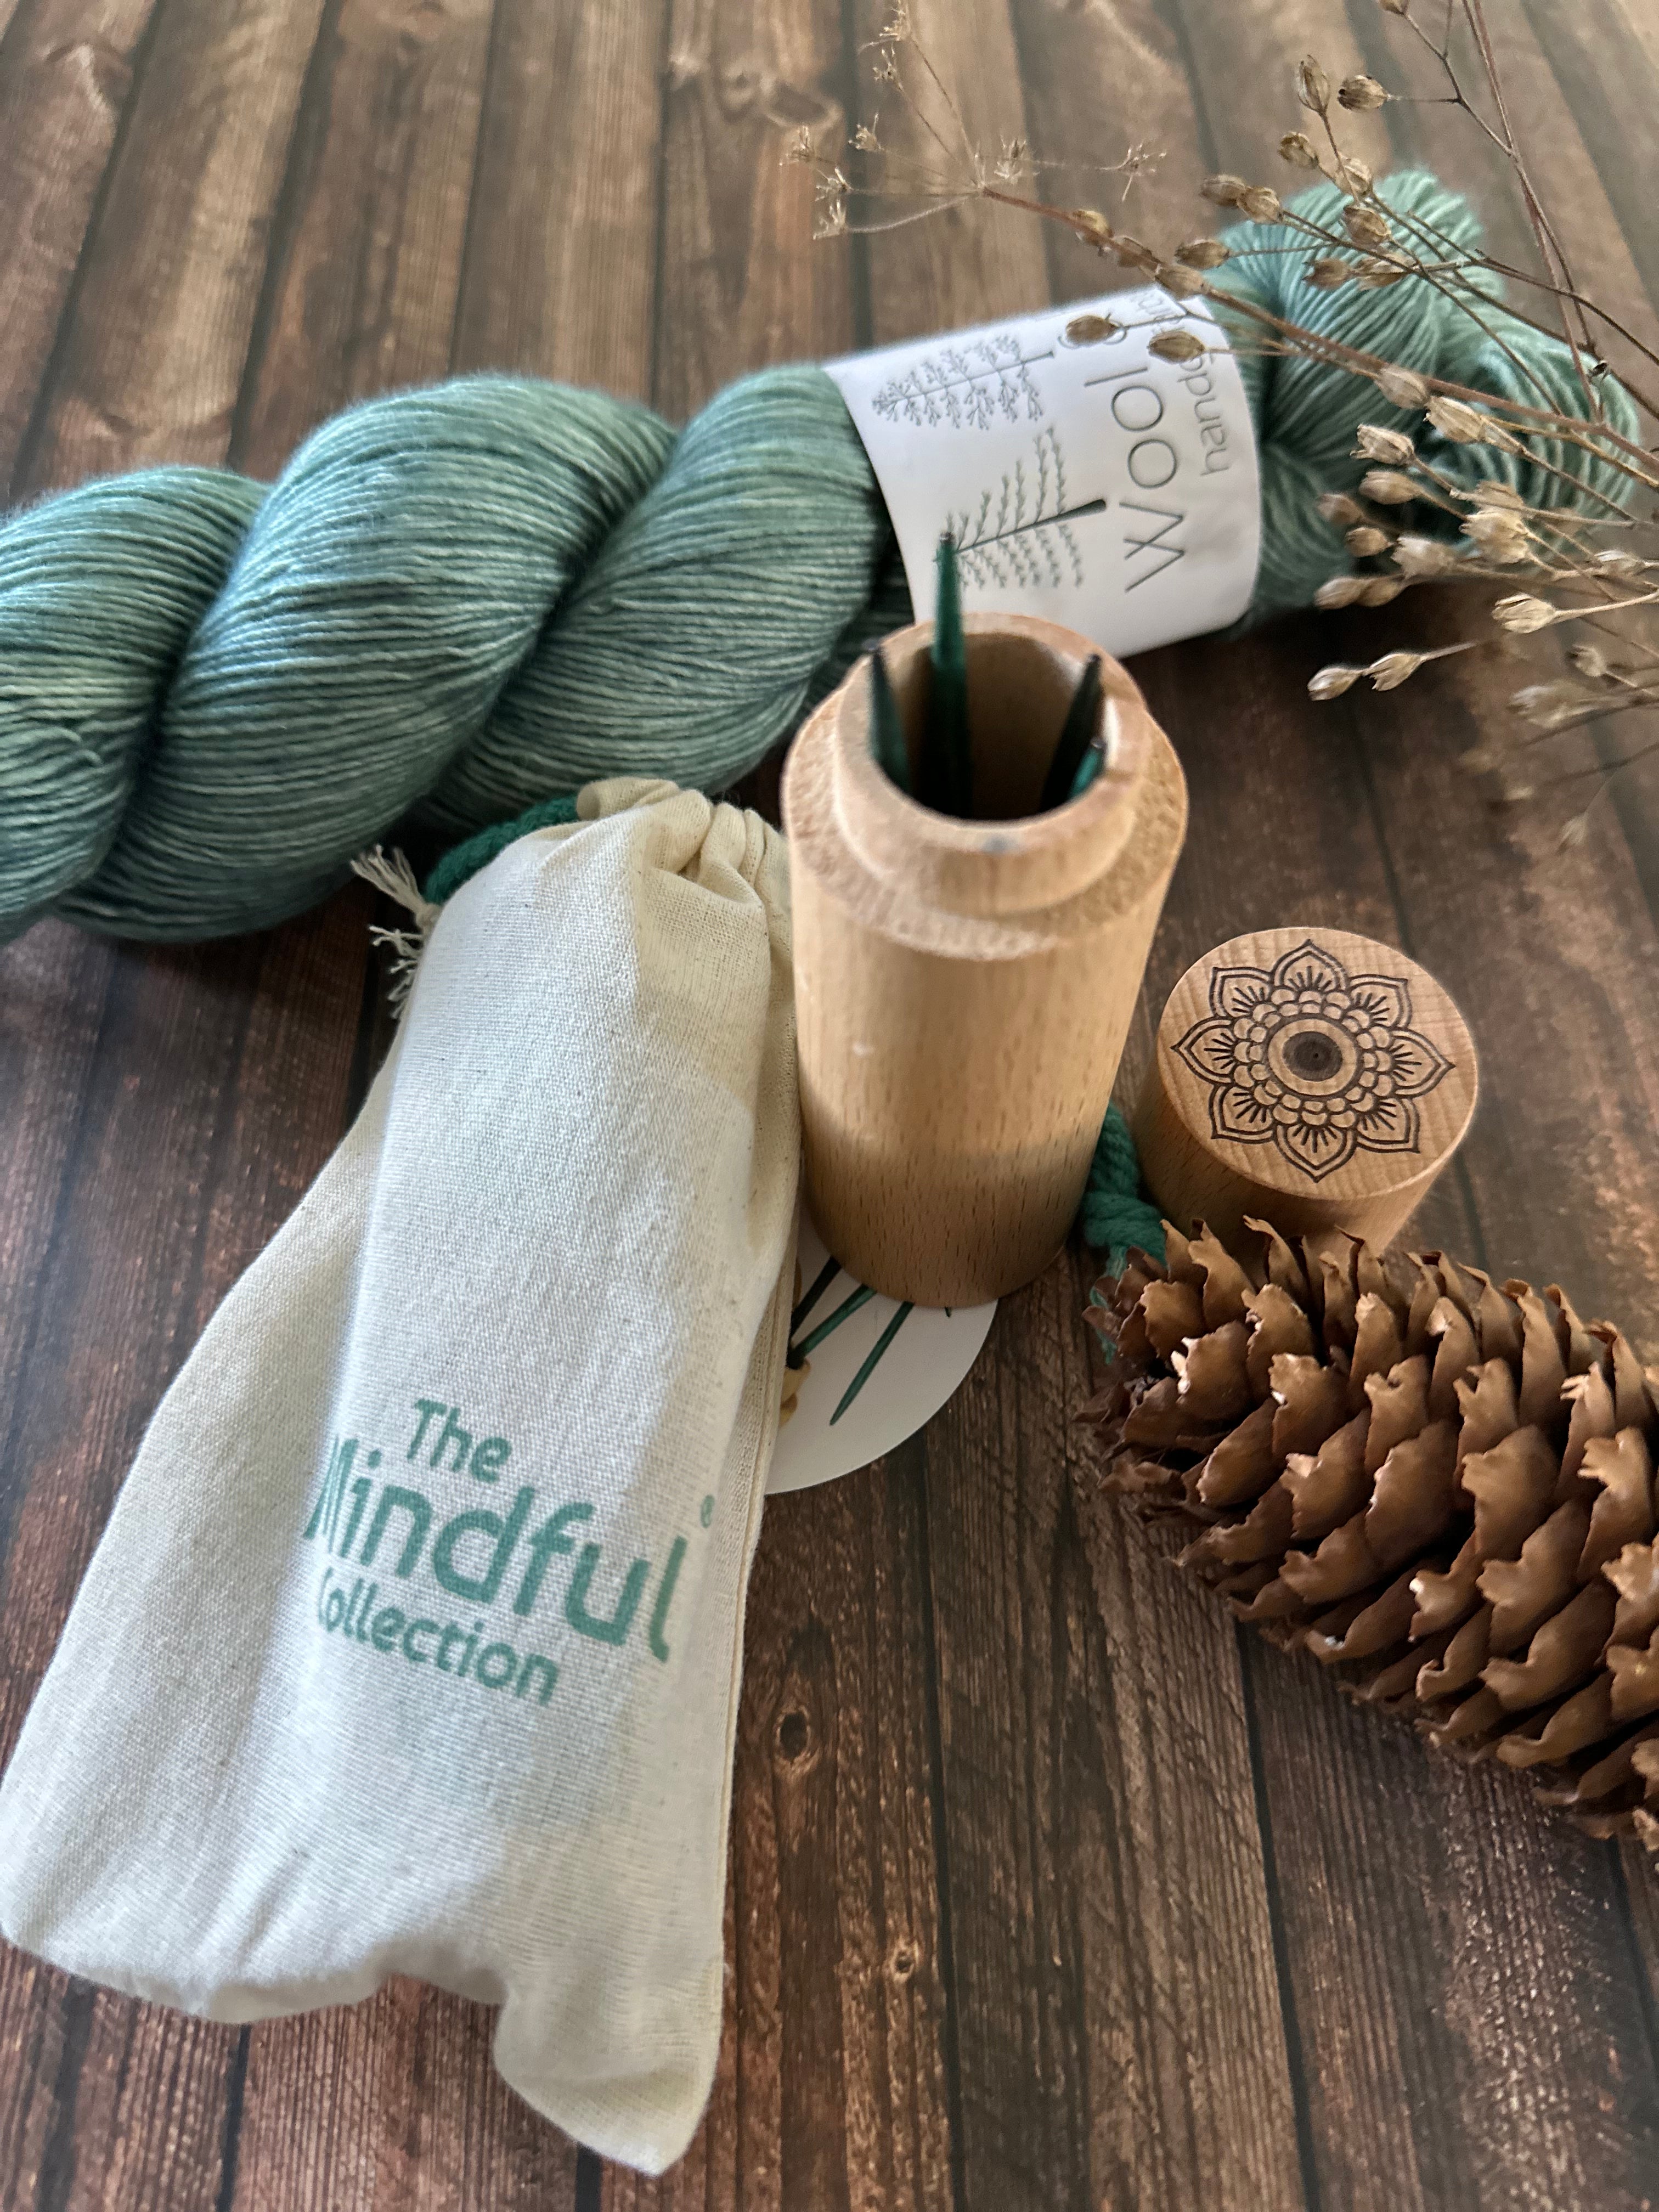 Wollnadelset  -  Knit Pro  The Mindful Collection -